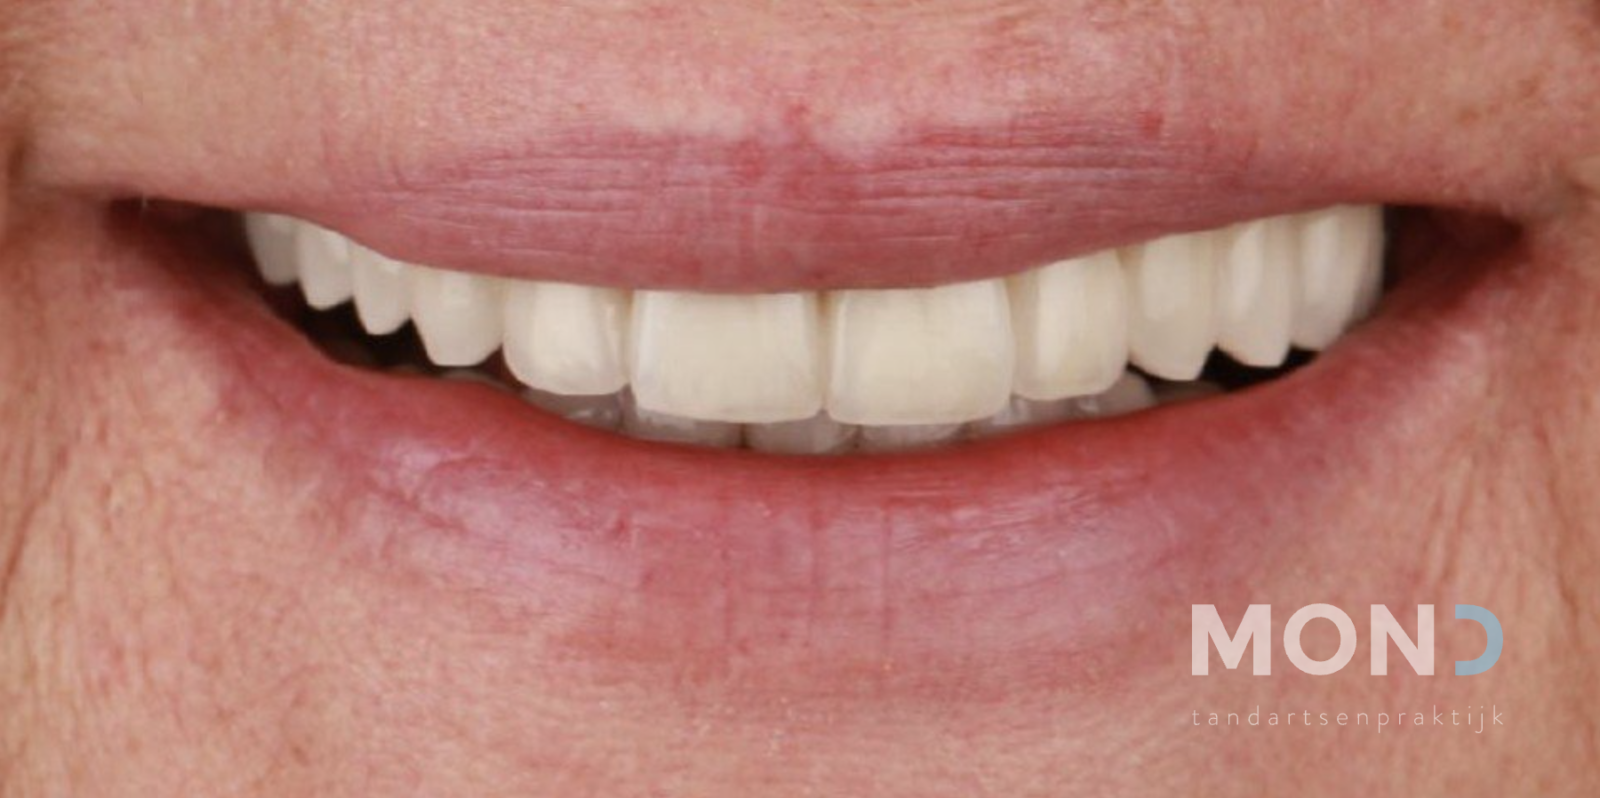 Completing the missing teeth with veneers and crowns